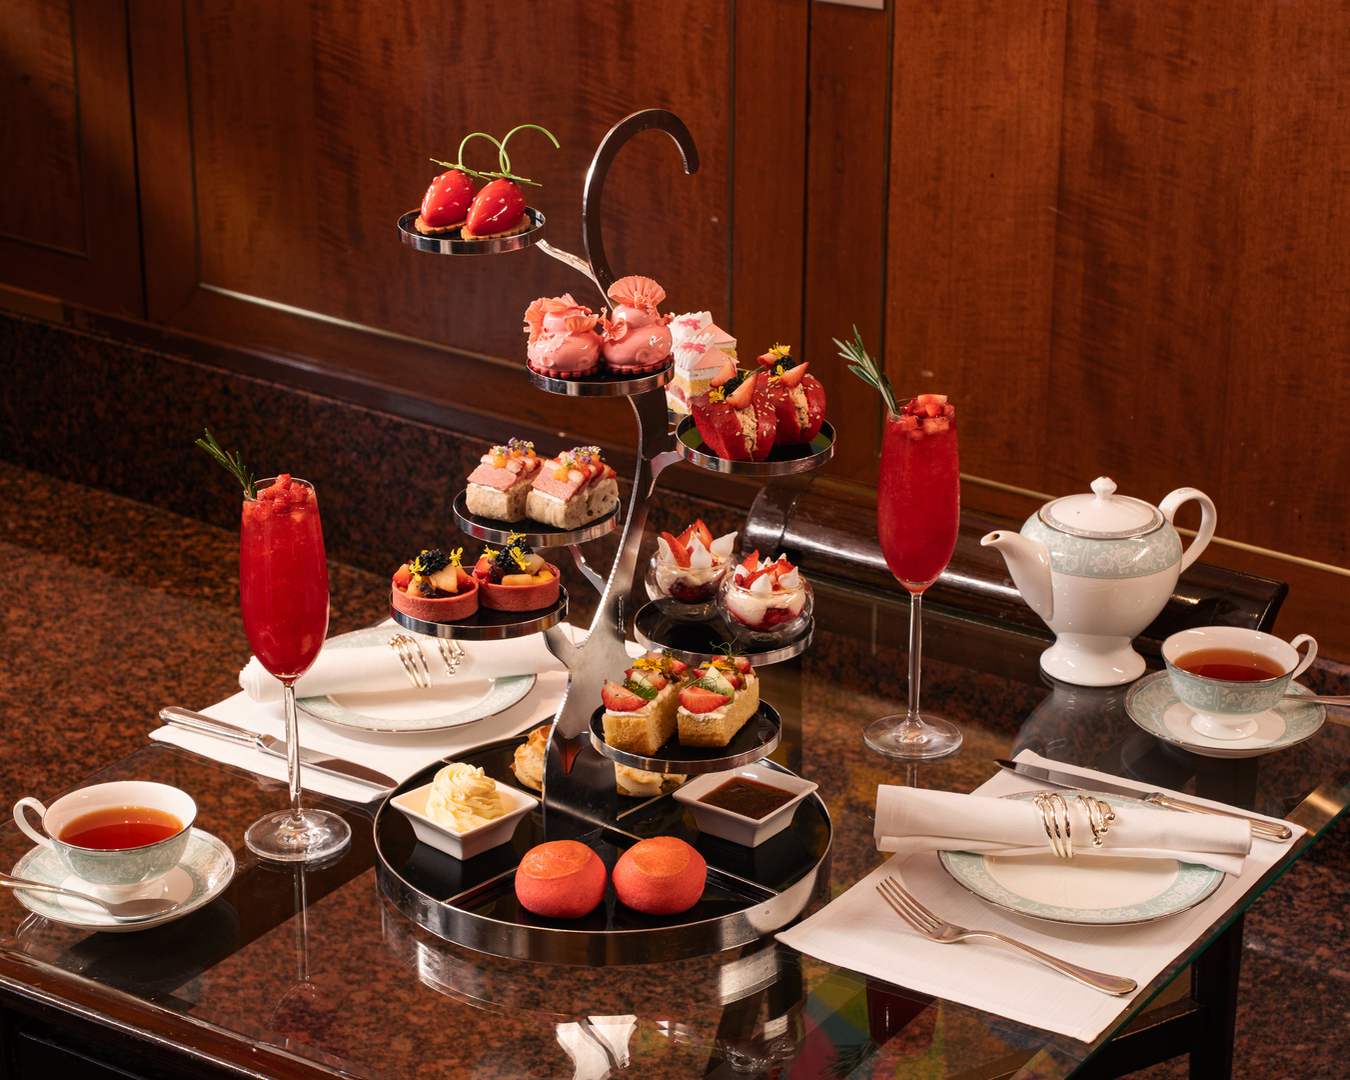 The Best High Tea In Singapore For An Indulgent Afternoon Treat | URBAN ...